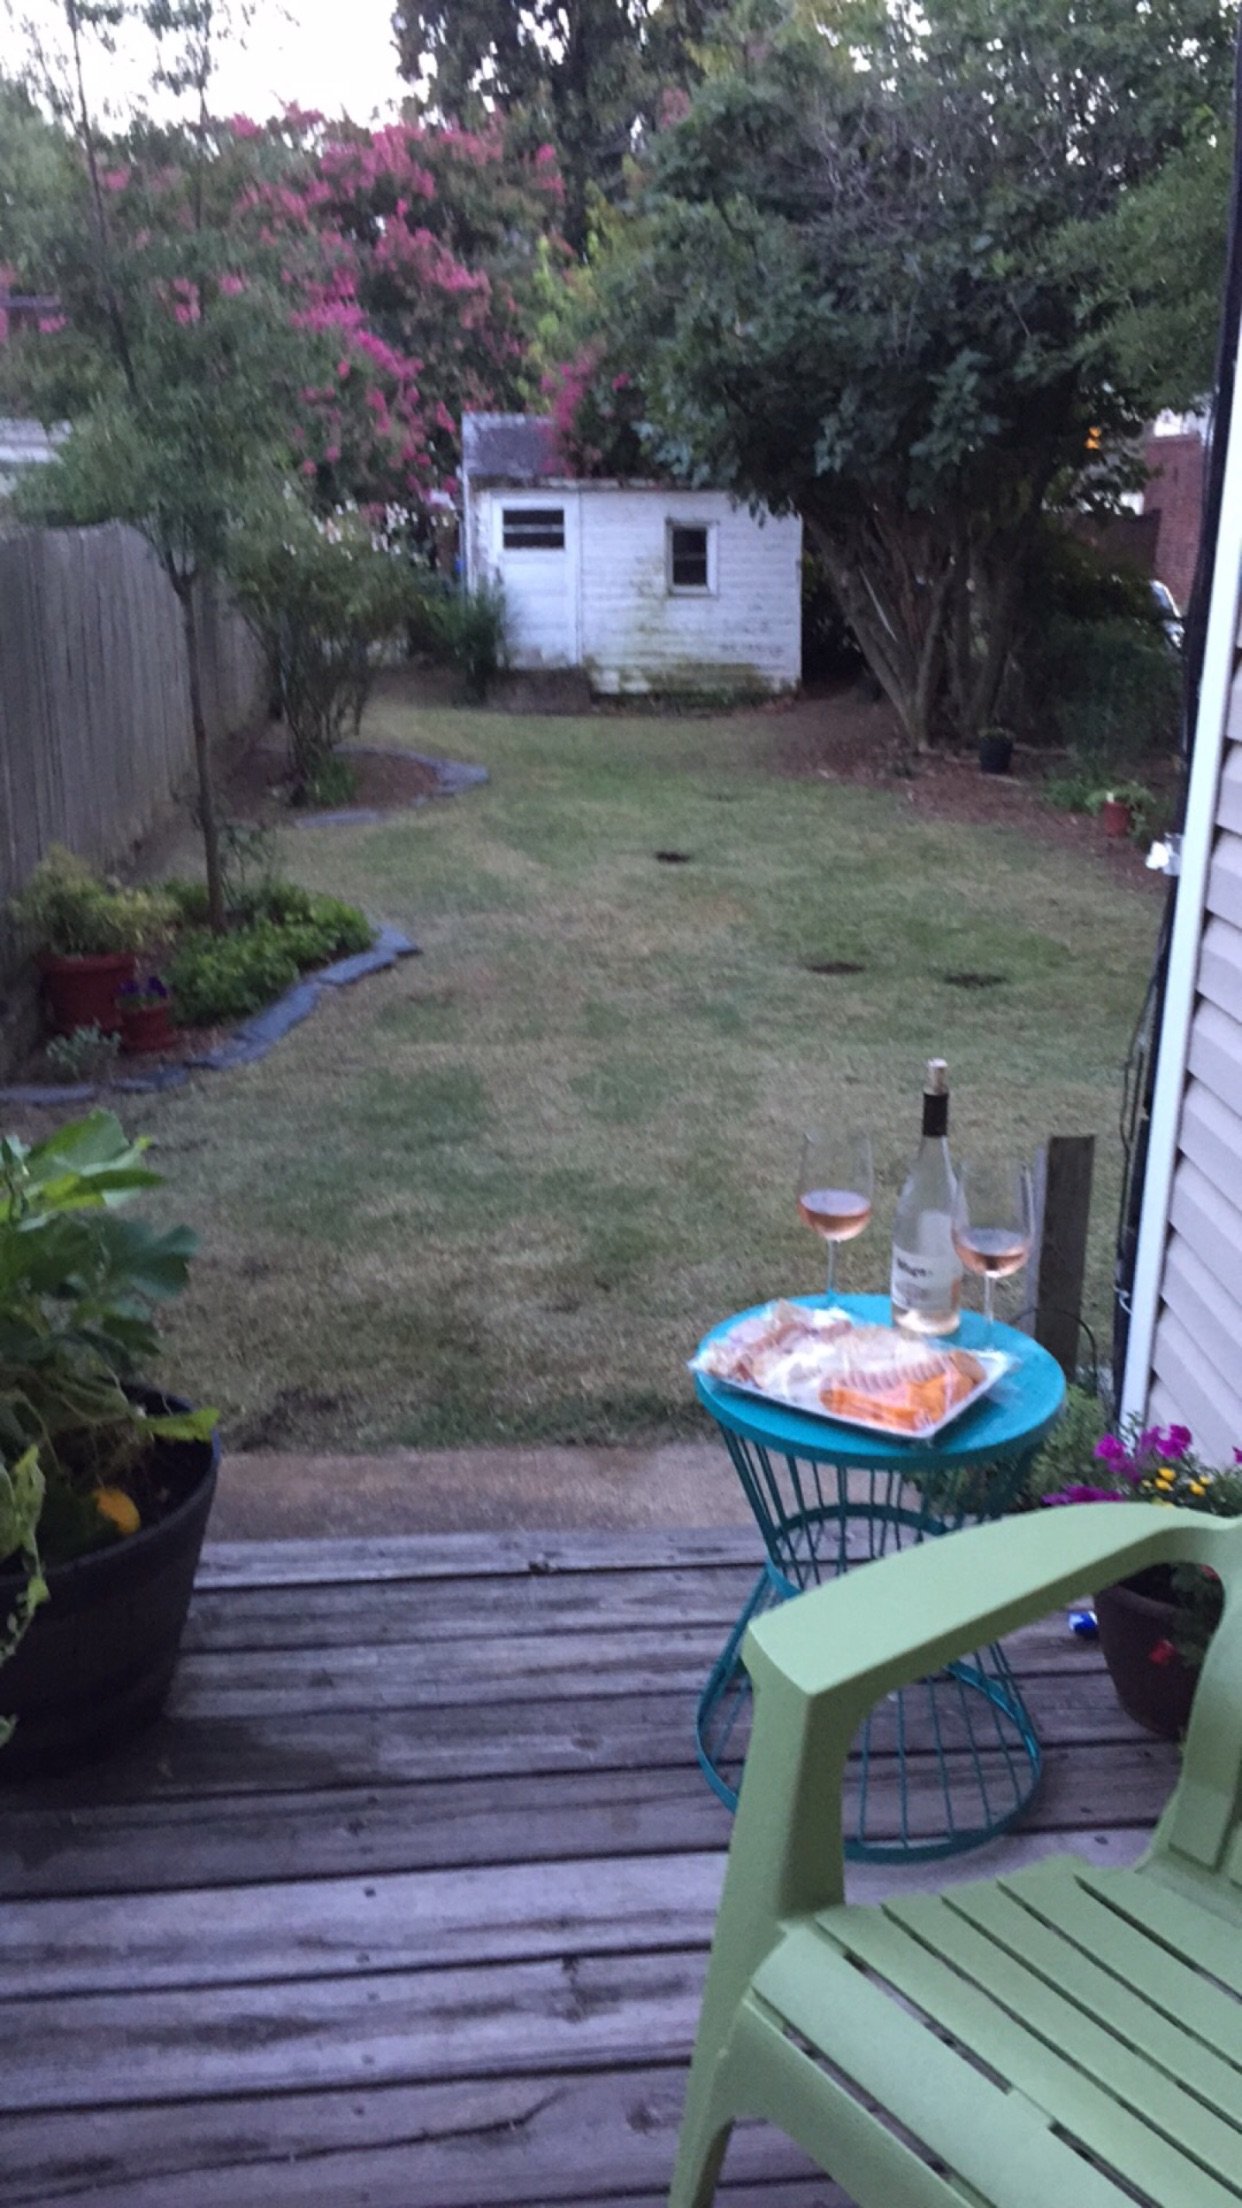 Enjoying the Results after restoring the overgrown lawn.jpg